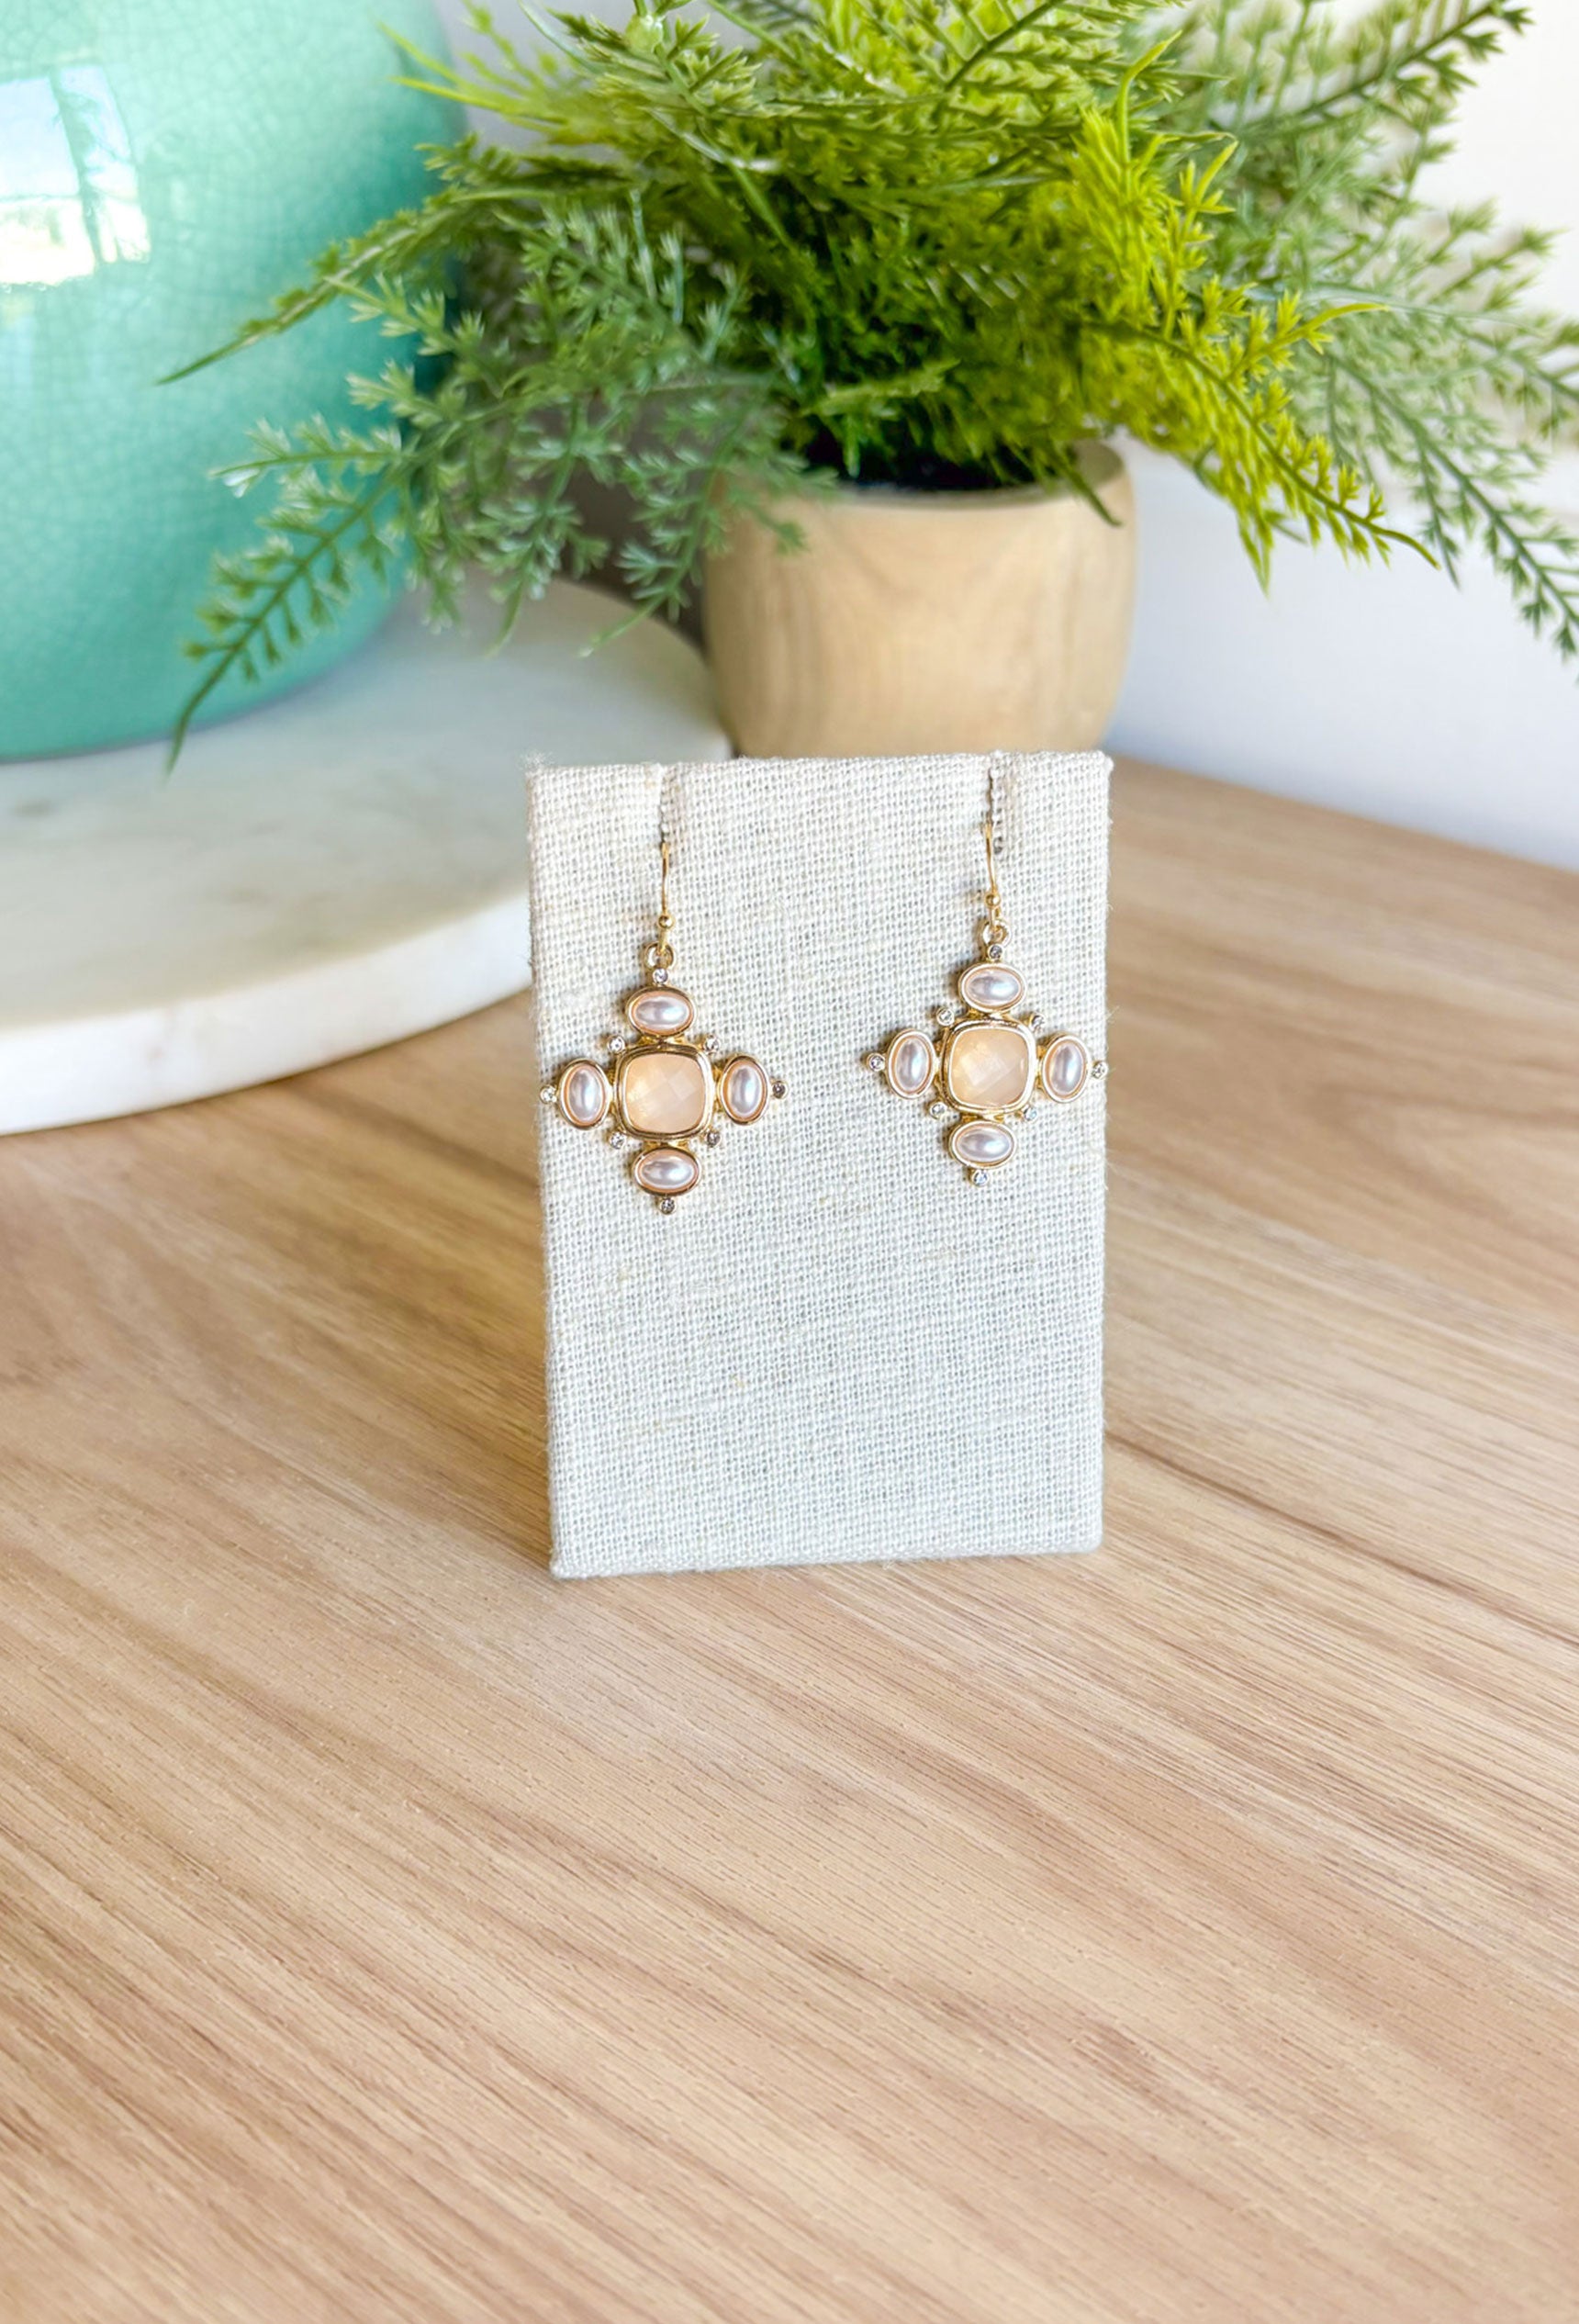 Make A Choice Earrings, stone dangle earrings with pearl and translucent tan stone in the middle 